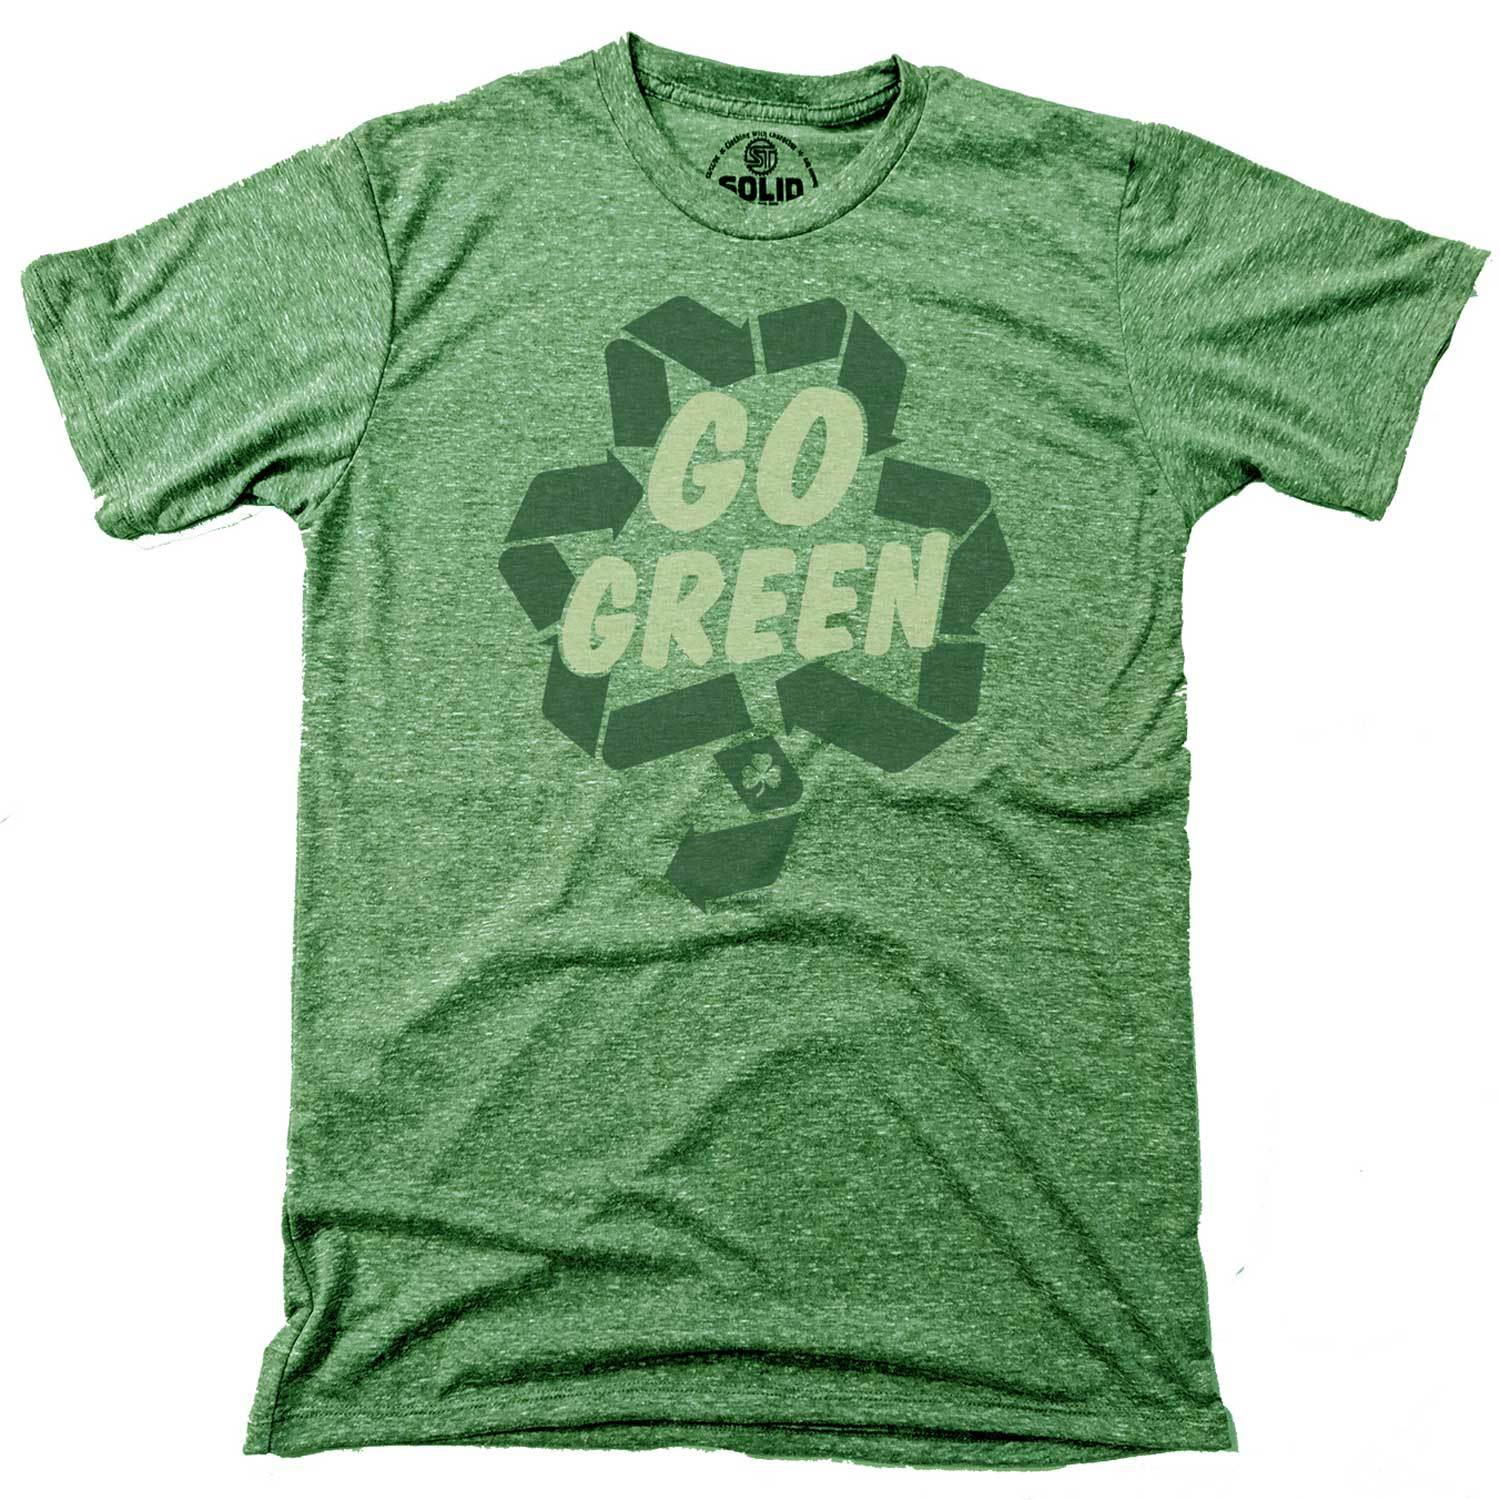 Shamrock Vintage Paddys Solid Green Tee - Graphic T-Shirt | St Cool Threads Go